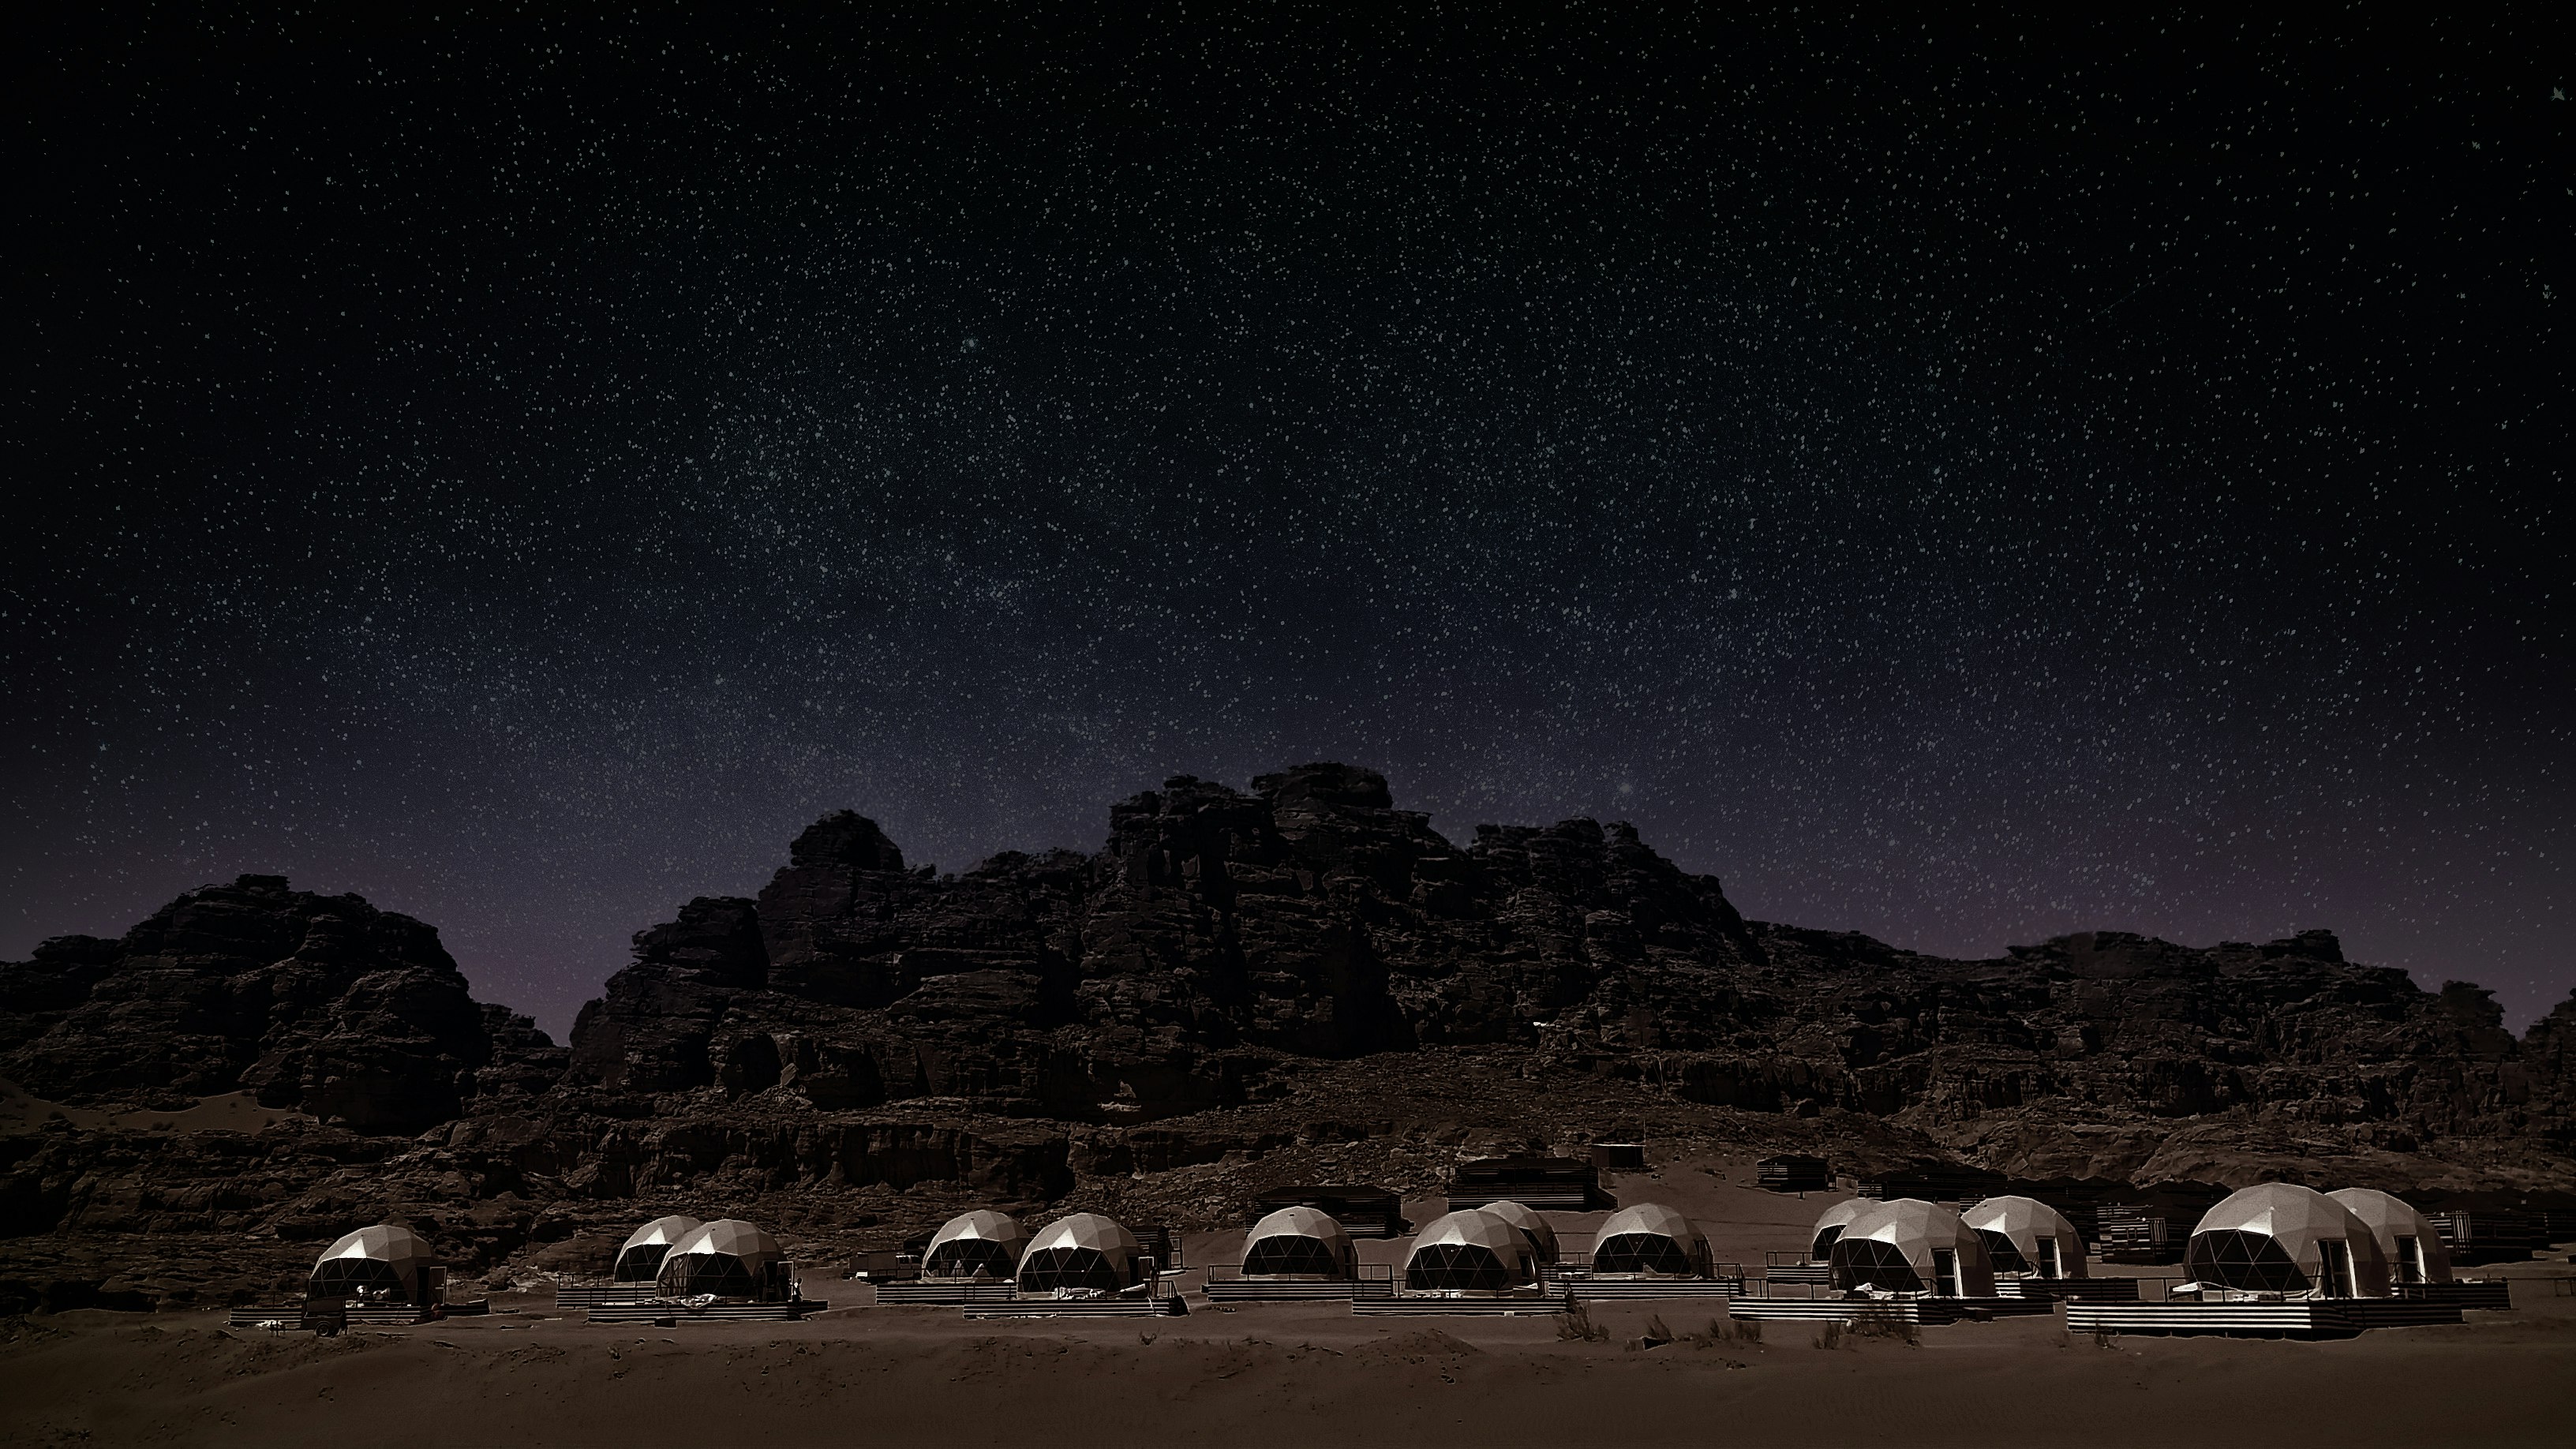 Have a Martian experience in Jordan this year.